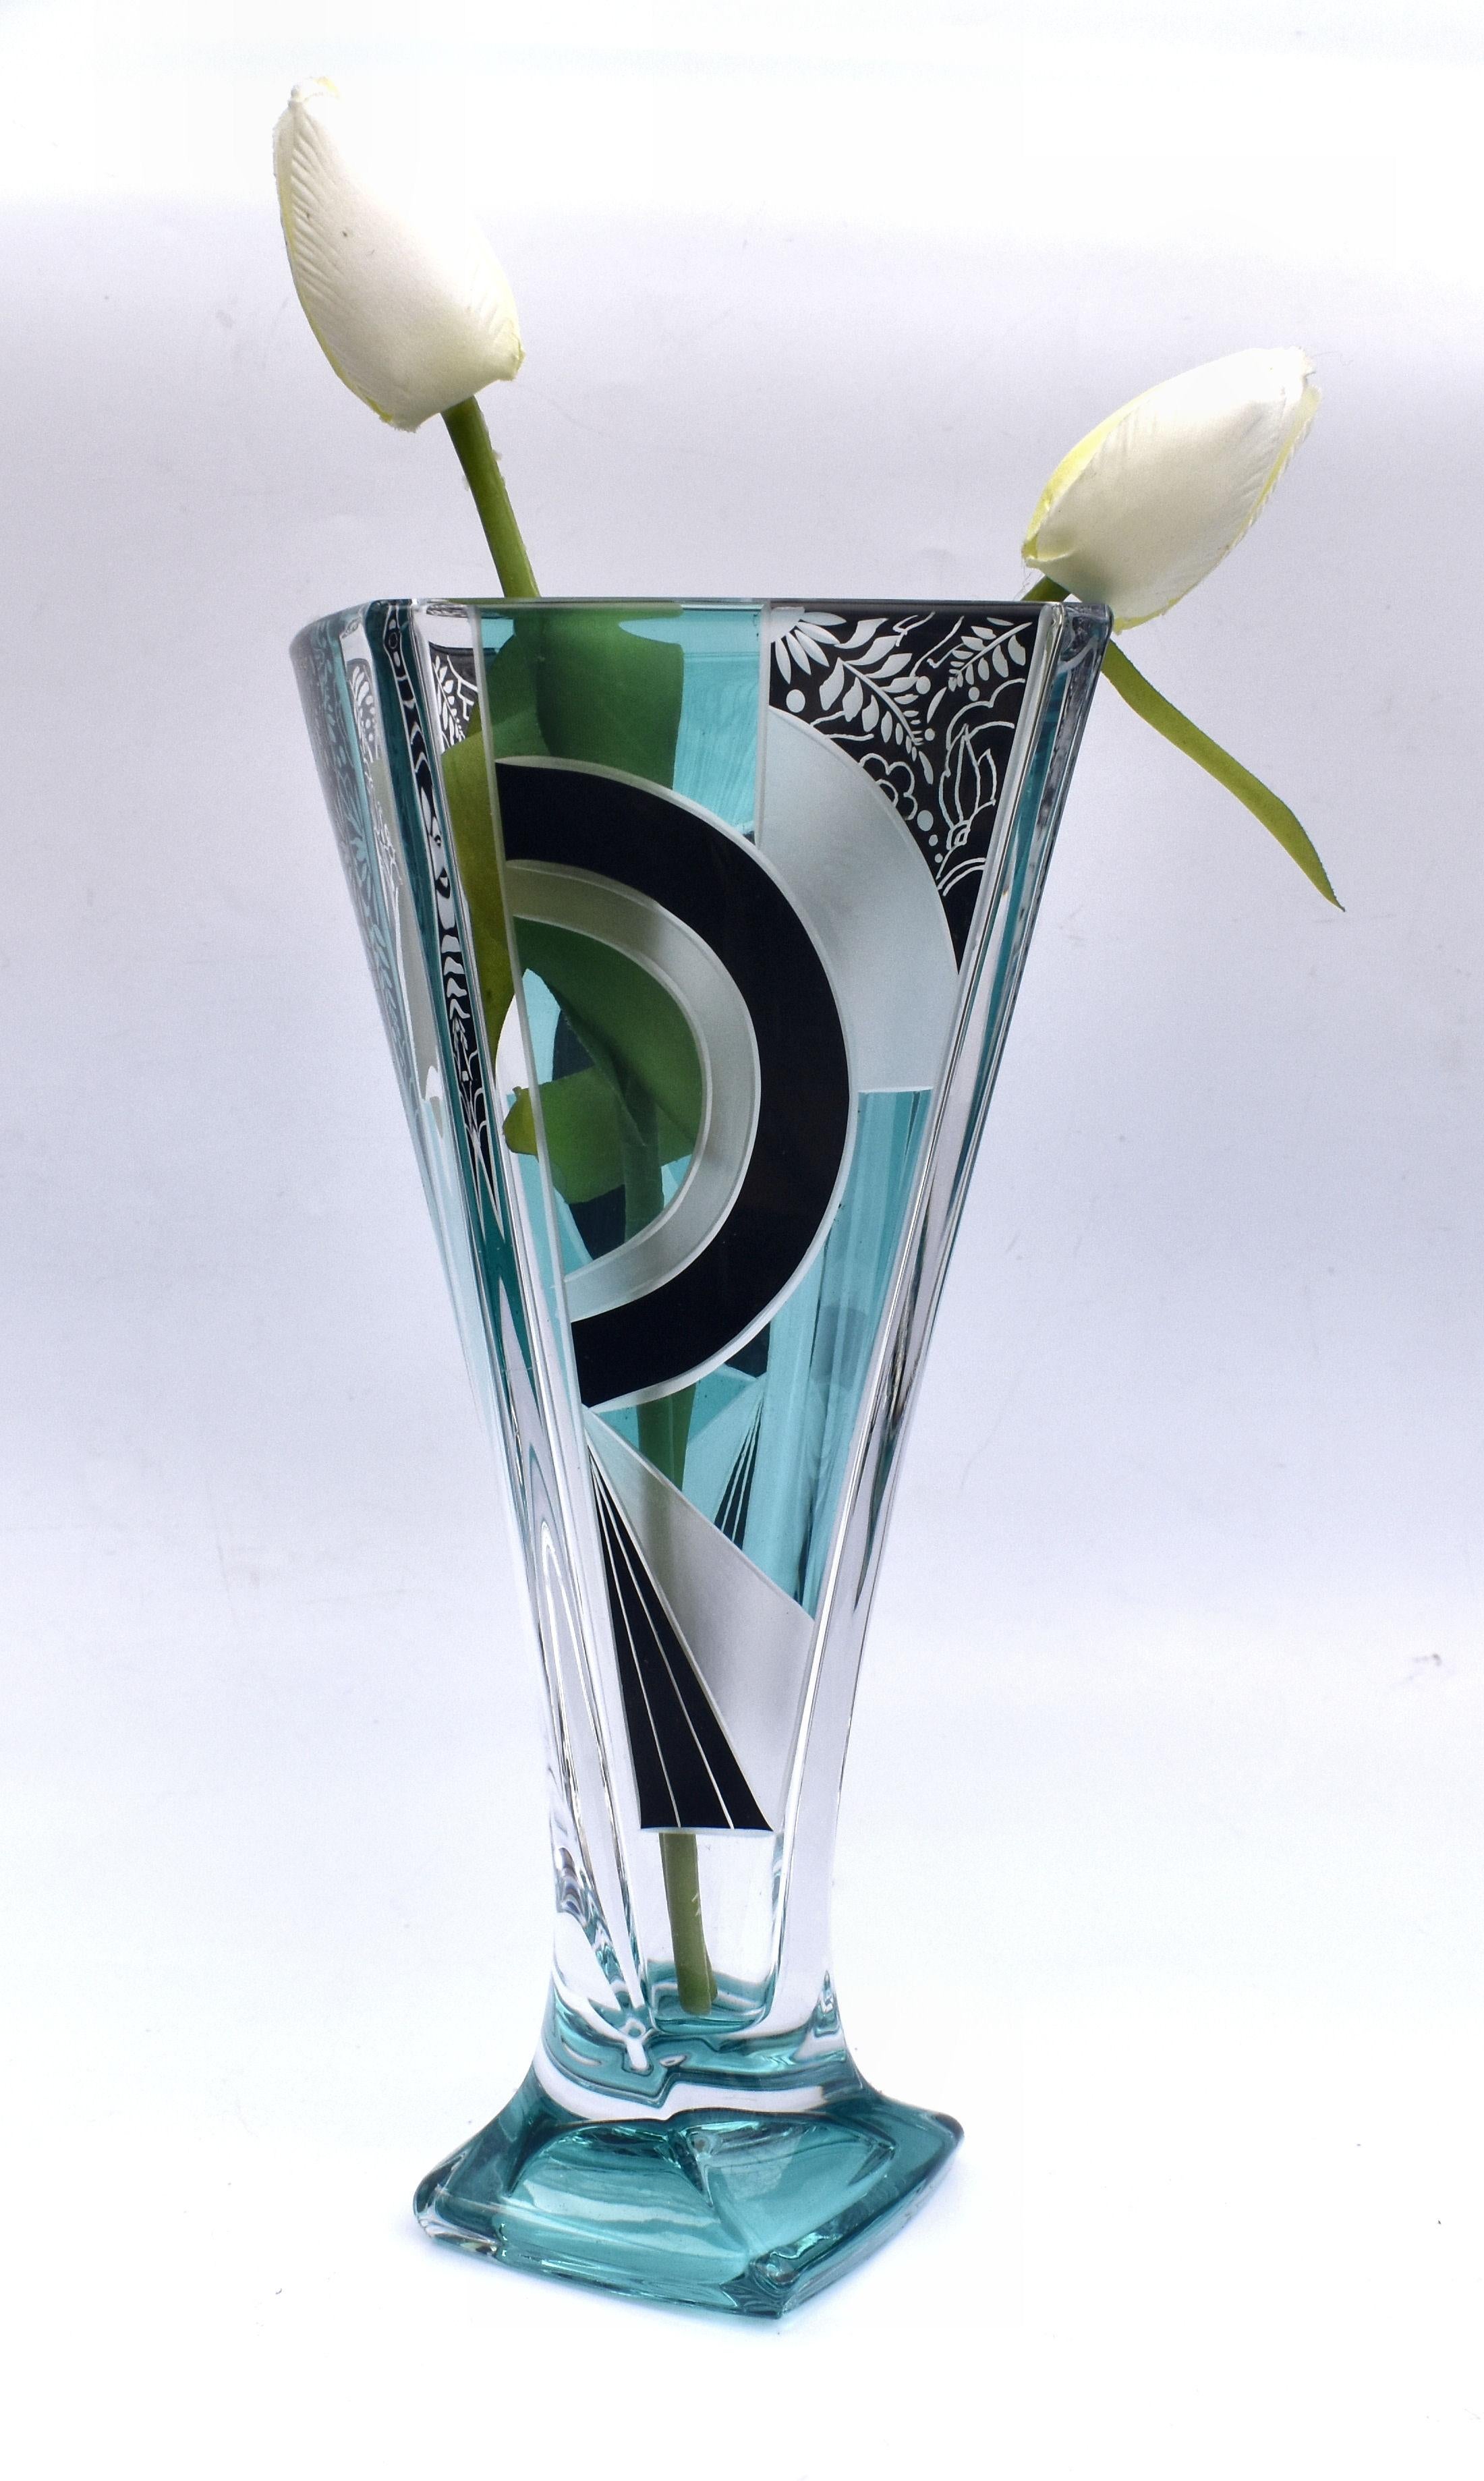 For your consideration is this exceptional 1930's Art Deco glass vase possibly by Karl Palda and what a gem it is. It really does pack a punch being very tall and elegant and with the most glorious geometric decoration. Heavy quality glass with no